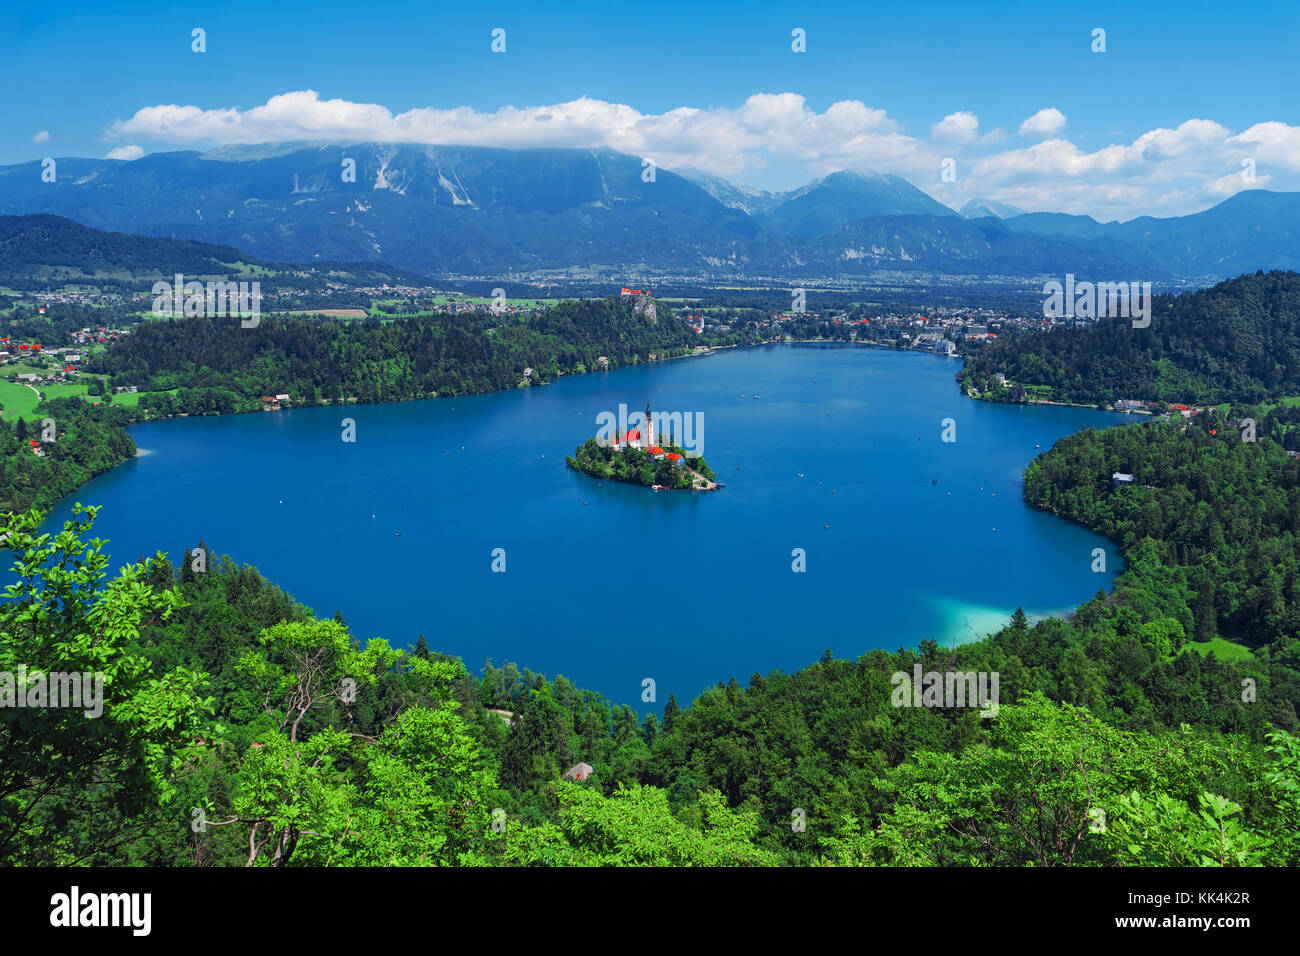 Aerial view of Lake Bled, Alps, Slovenia, Europe. Mountain alpine lake. Island with church in Lake Bled. Summer landscape. Castle and mountains in bac Stock Photo